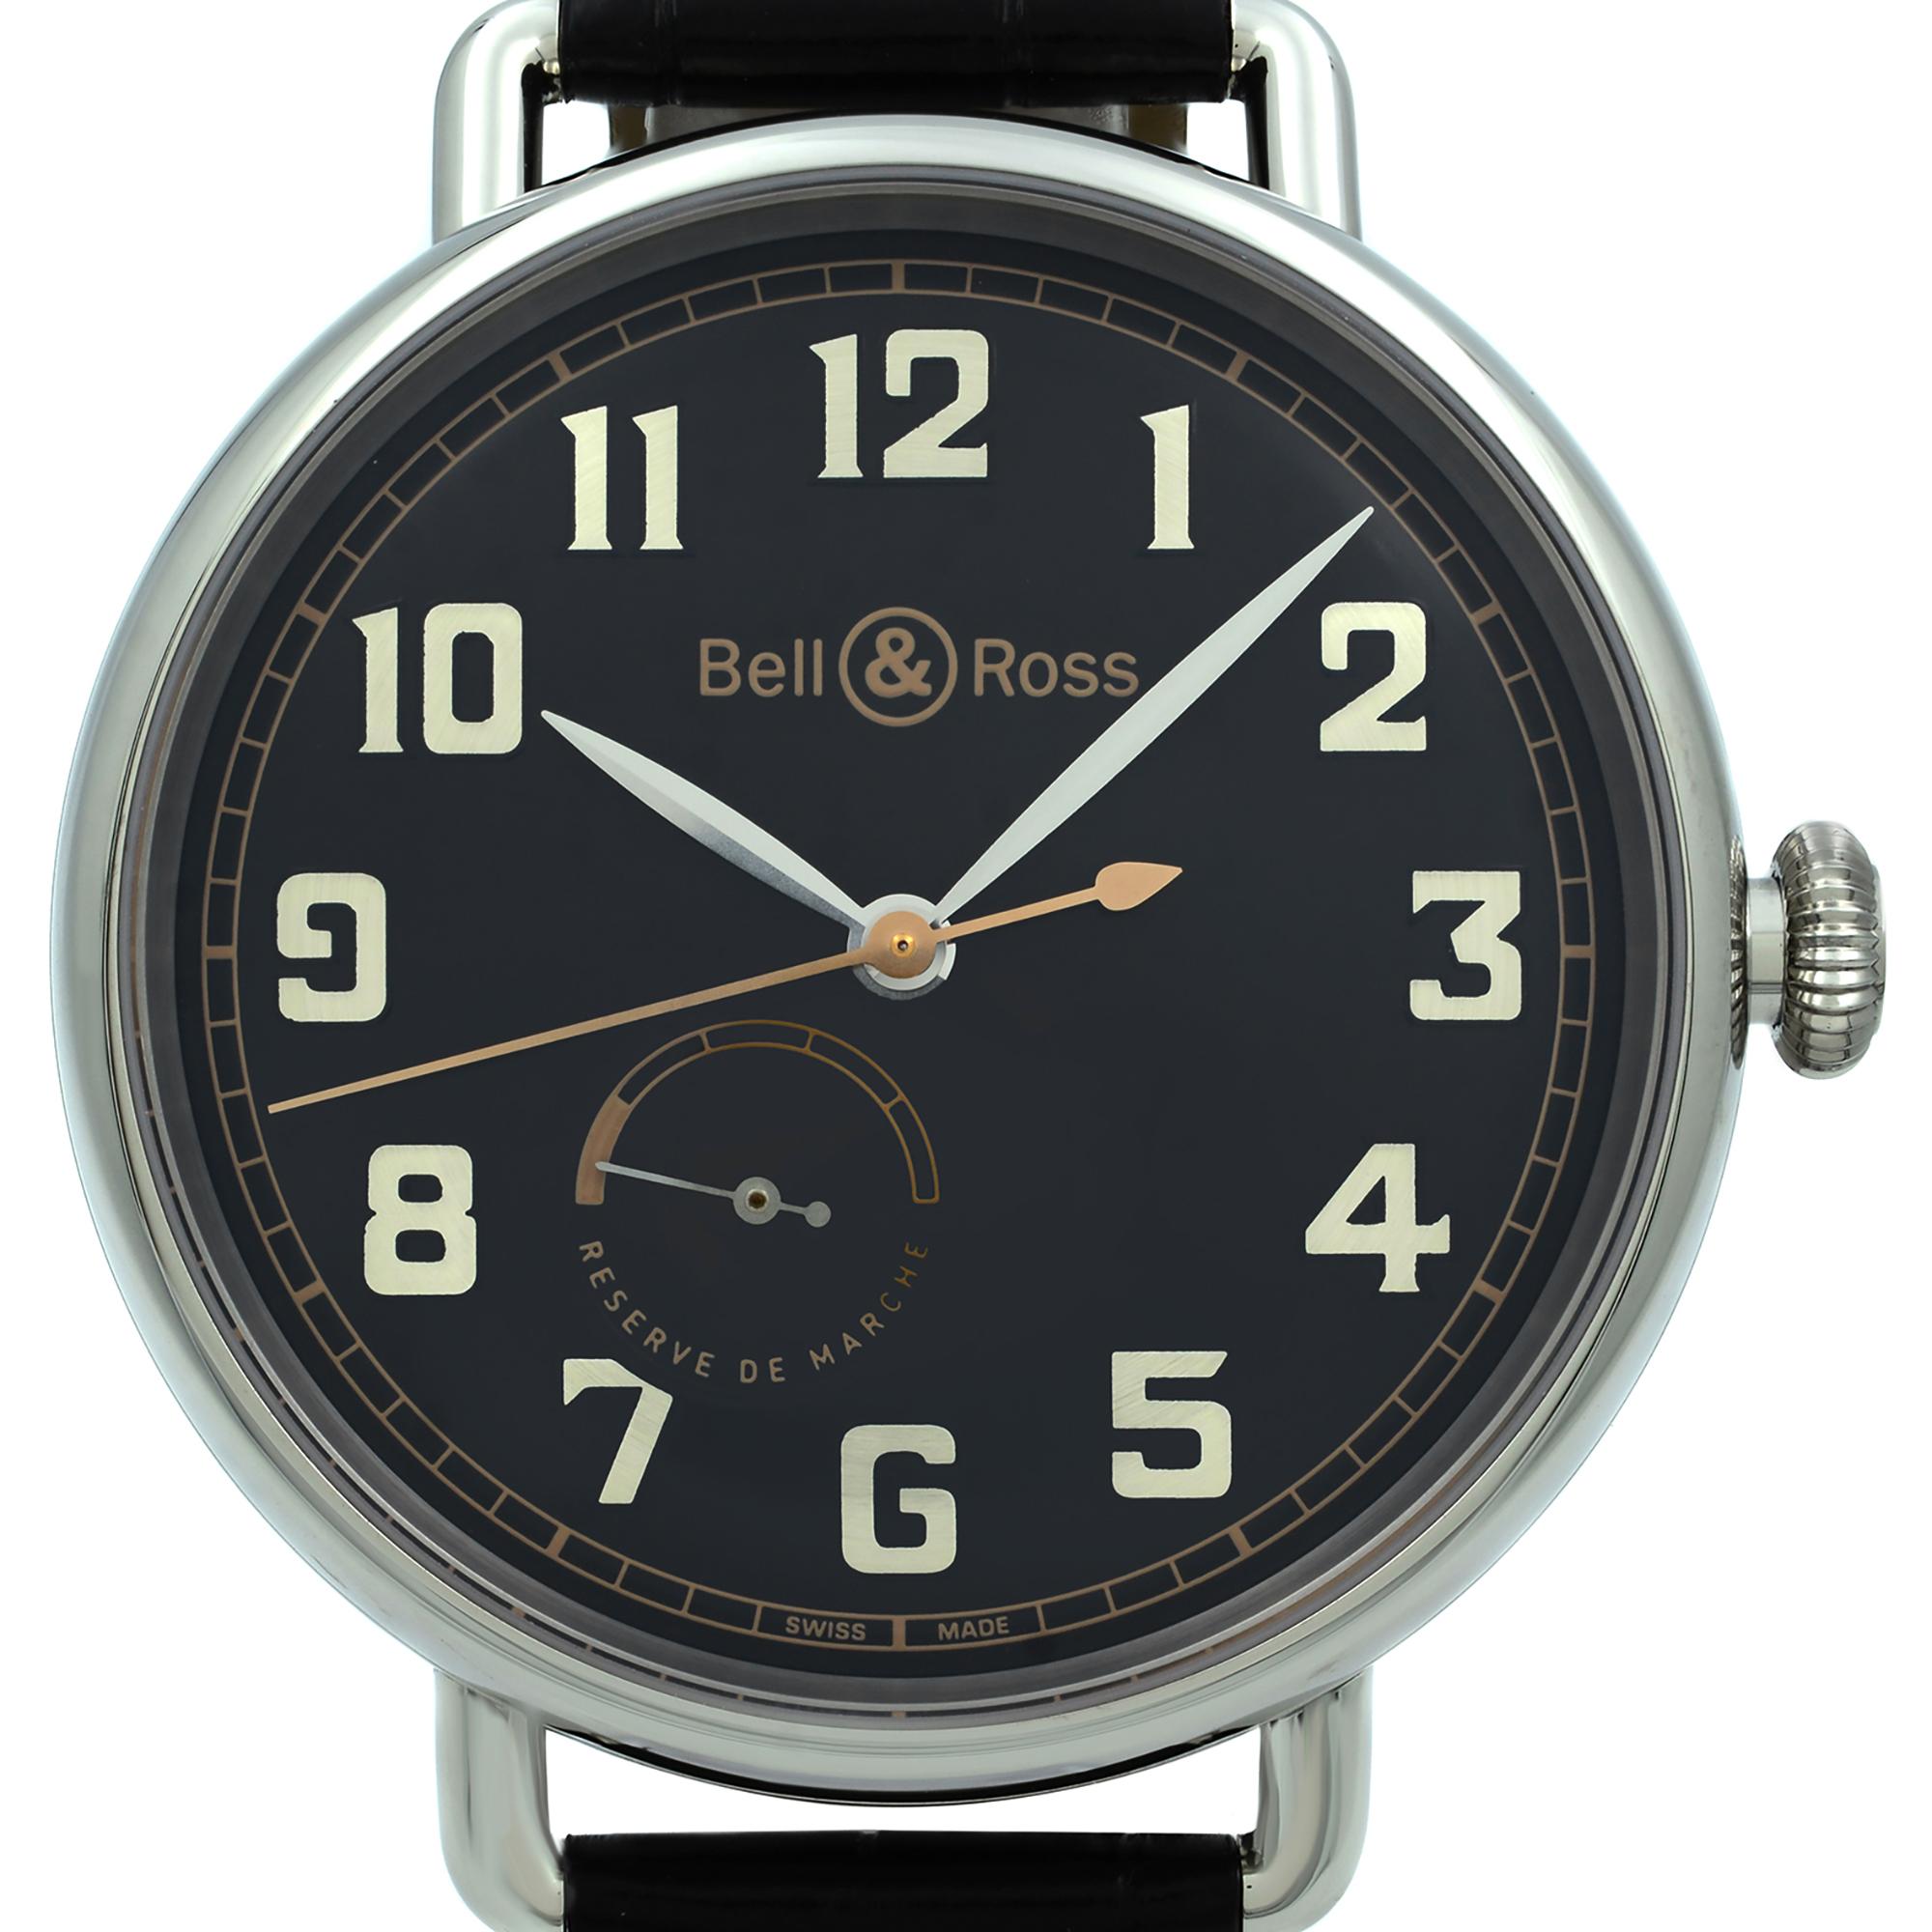 Brand New. Original Box and Papers are included Covered by a one-year Chronostore warranty.
Details:
MSRP 4500
Brand Bell & Ross
Department Men
Model Number BRWW197-HER-ST/SCR
Model Bell & Ross WW1
Style Classic, Dress/Formal
Band Color Black
Dial